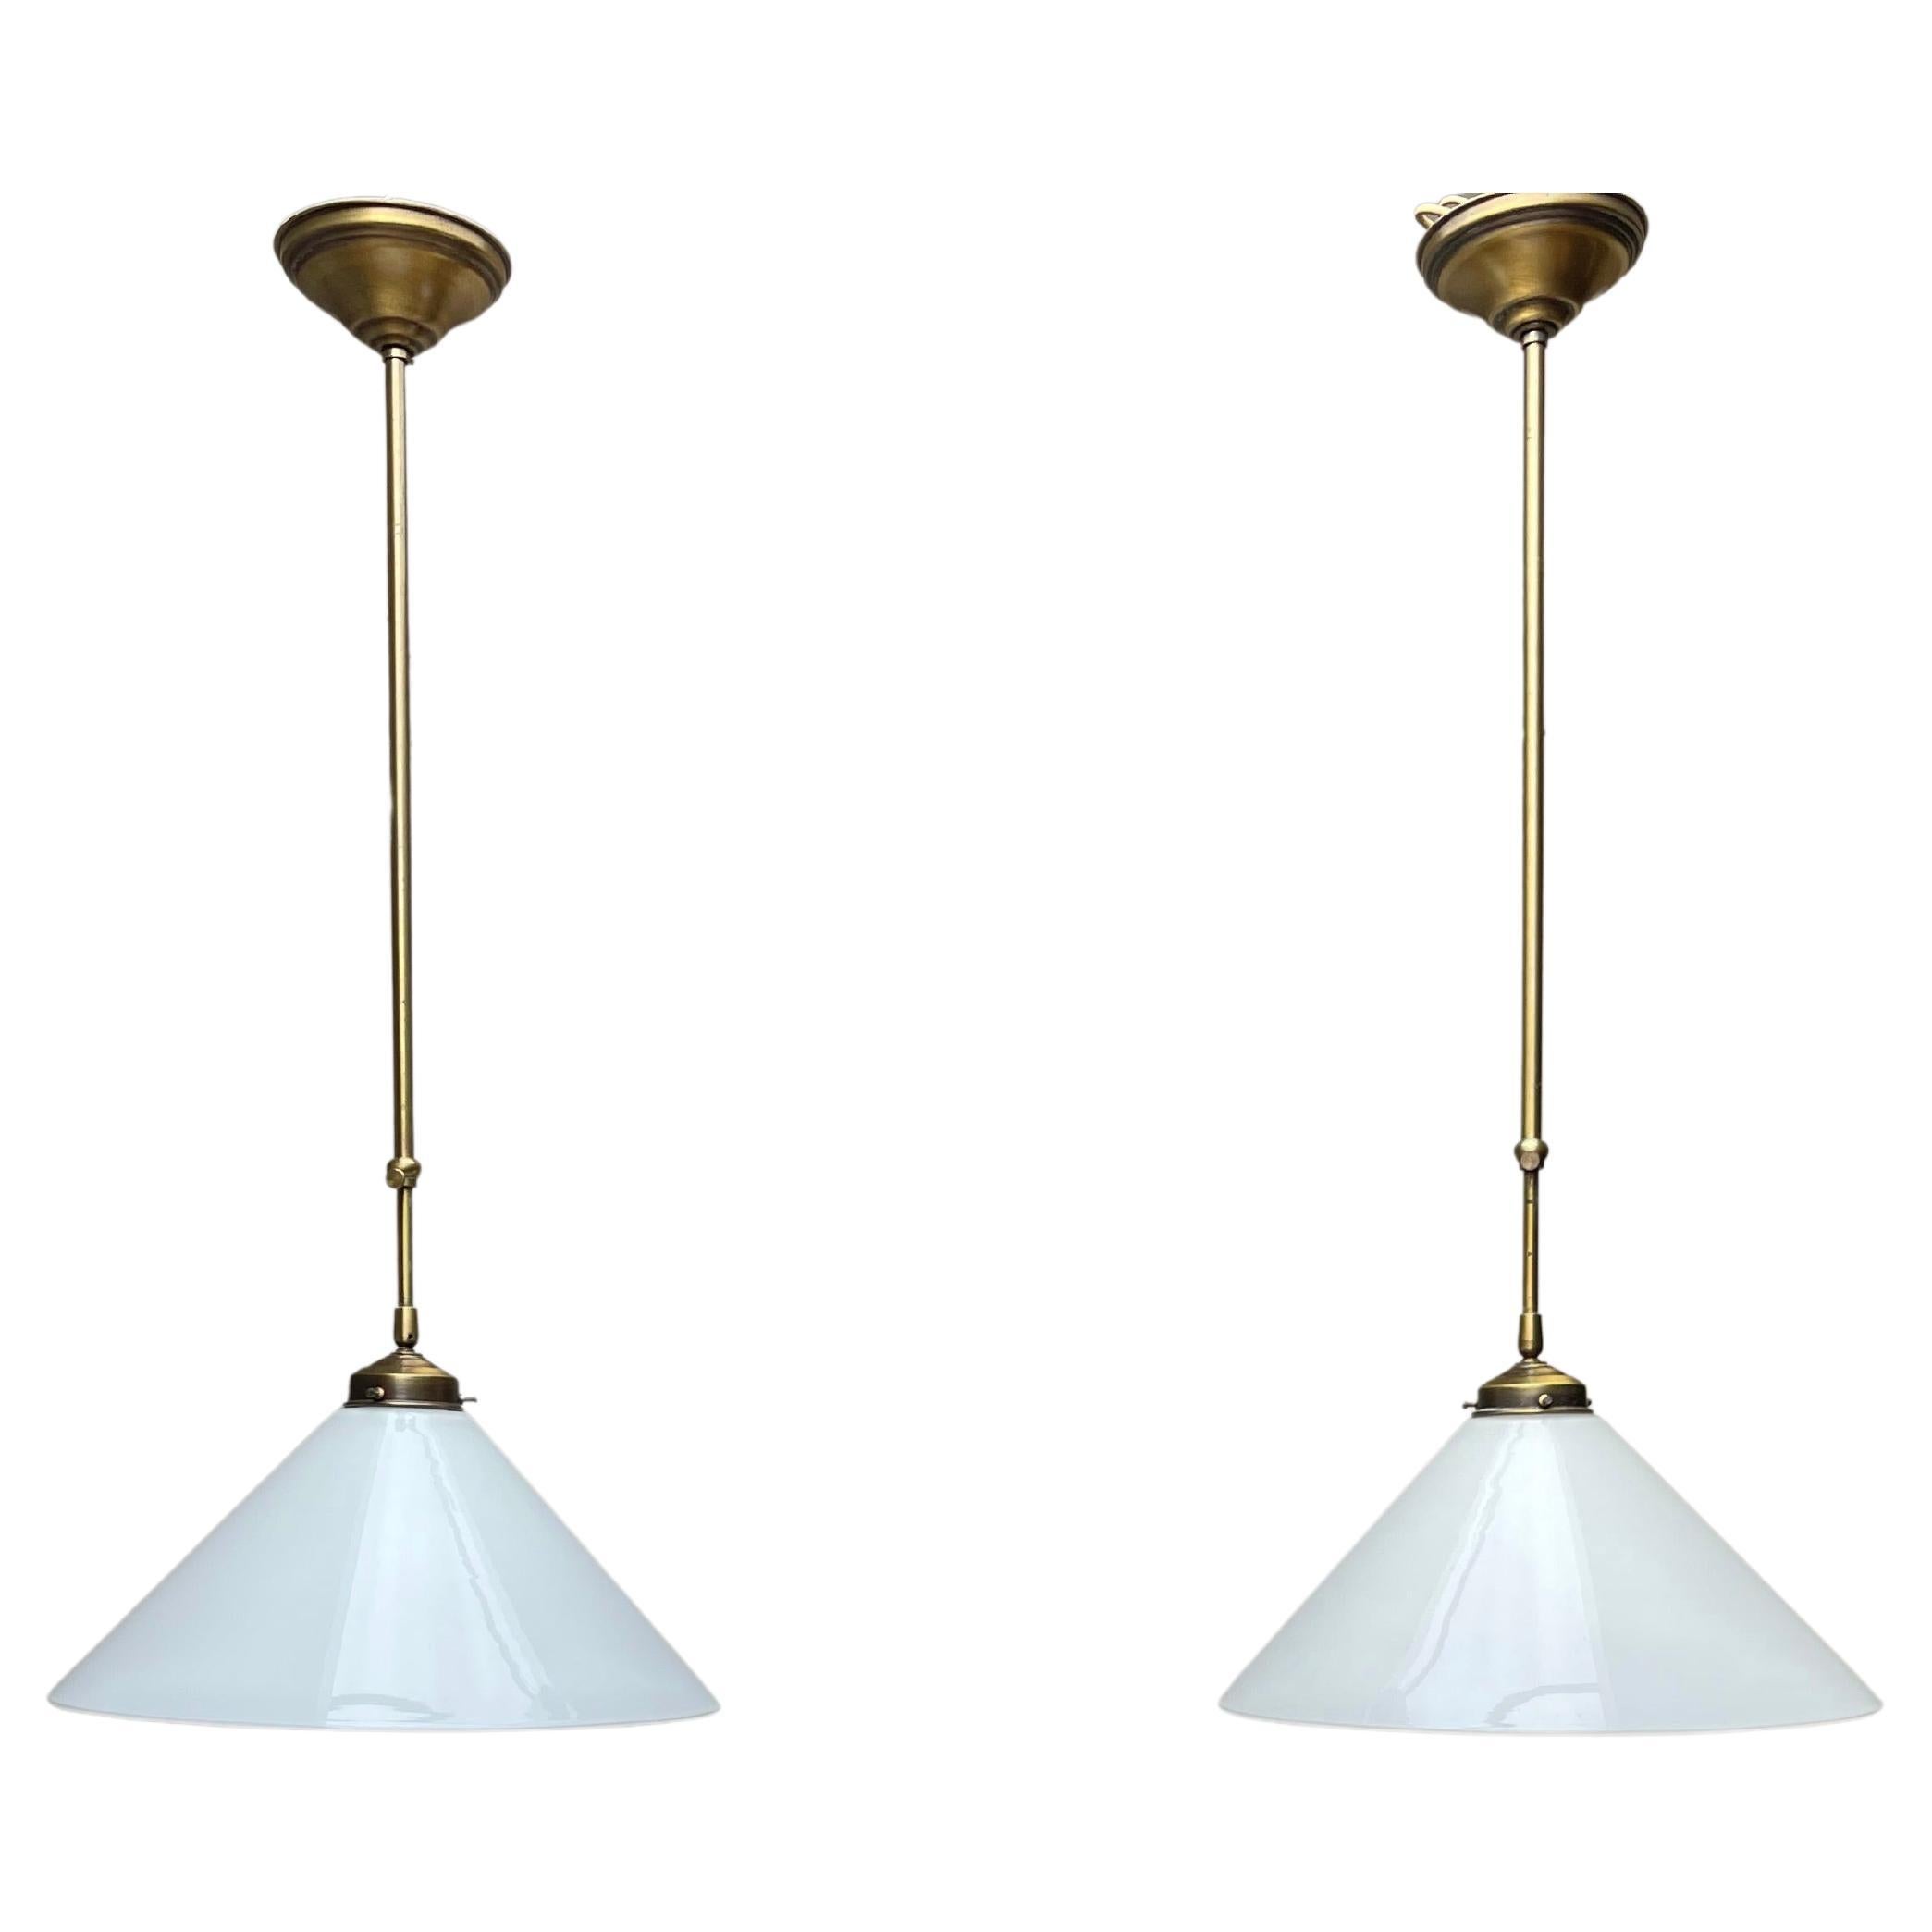 Pair of Midcentury Modern Opaline Glass and Brass Adjustable in Height Pendants